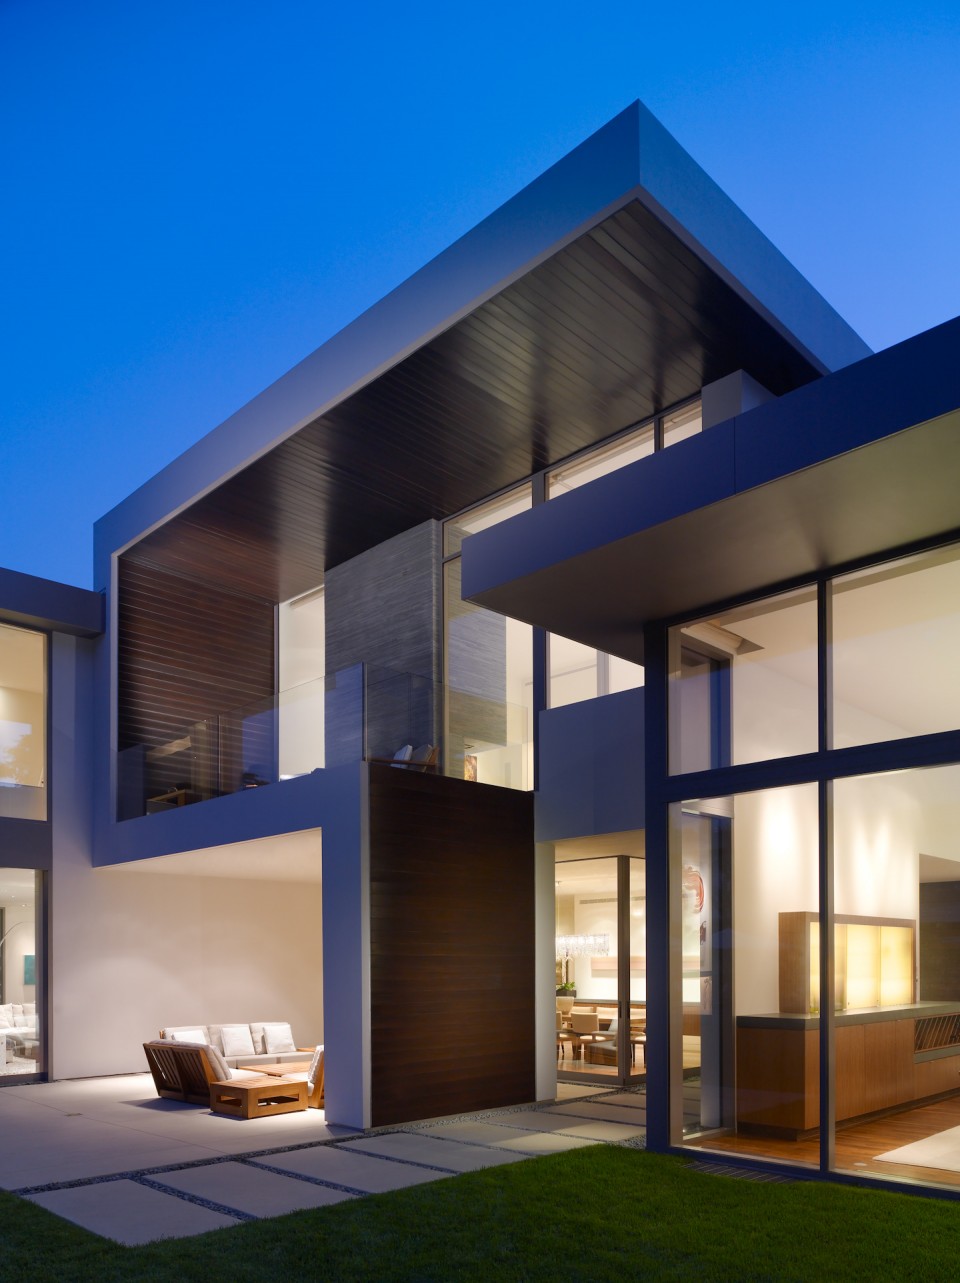 residence brentwood angeles los luxury contemporary modern facade architects belzberg architecture minimalist houses california roof super exteriors casas homes casa